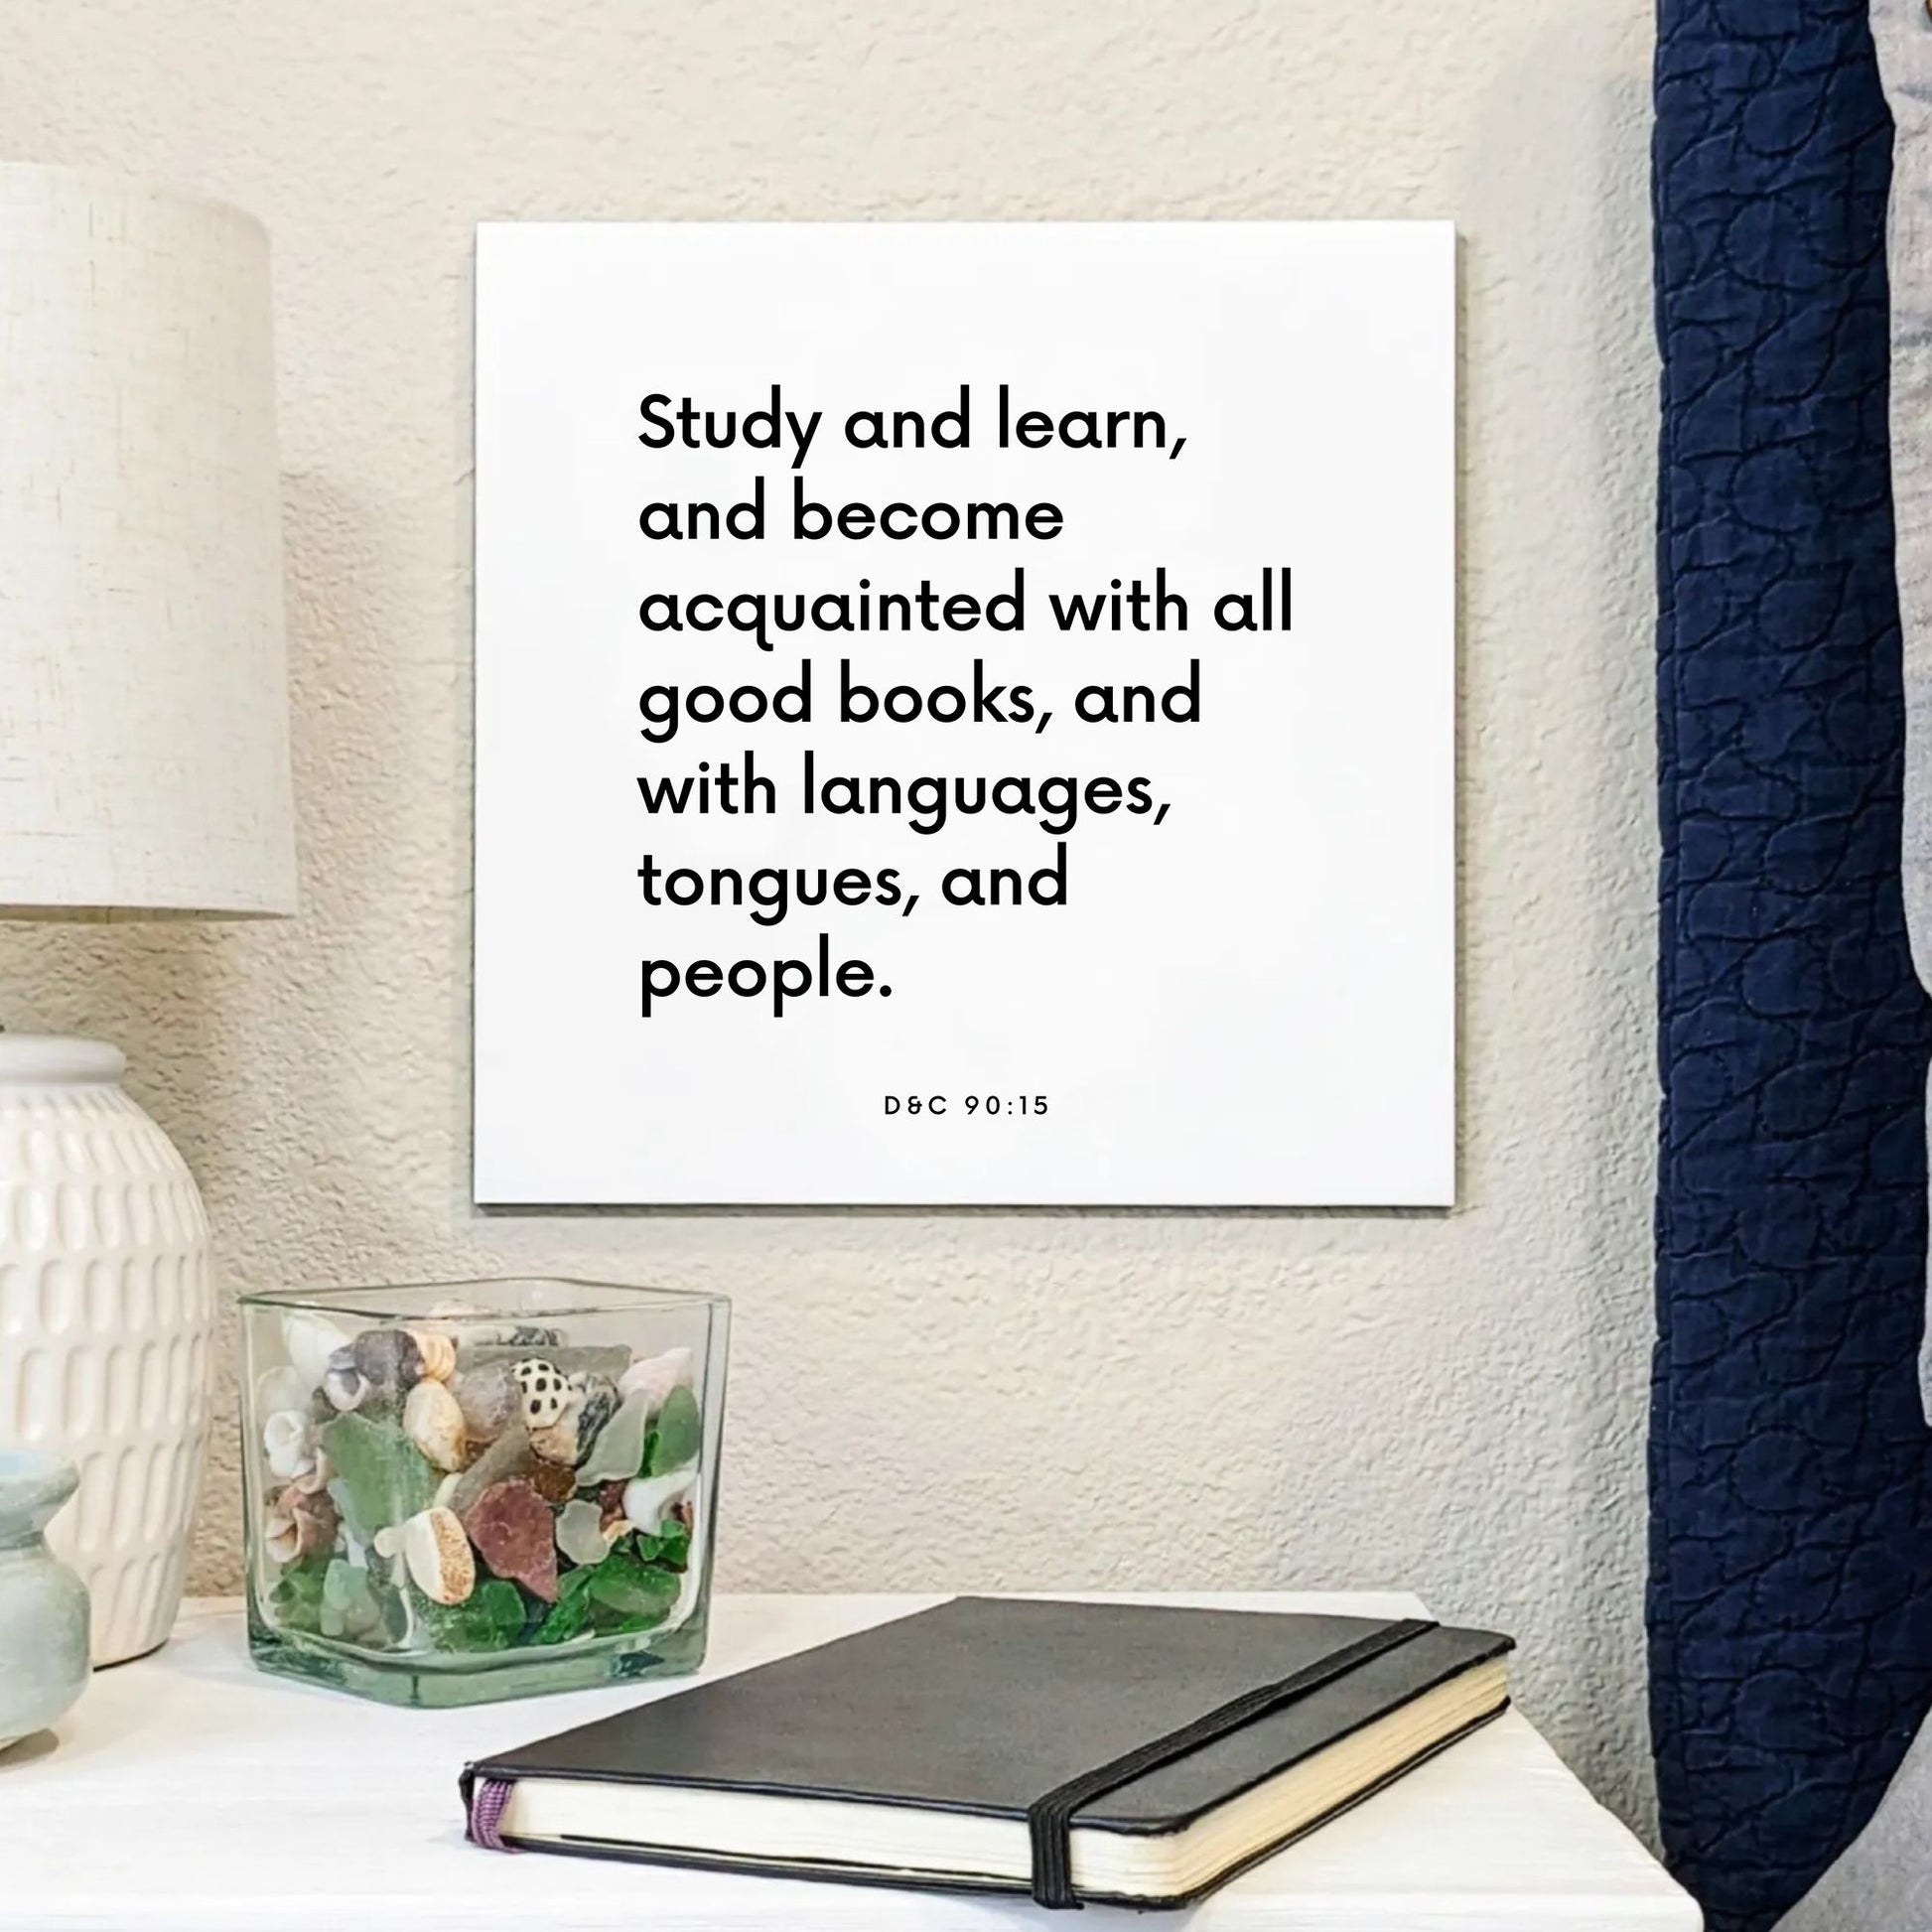 Bedside mouting of the scripture tile for D&C 90:15 - "Study and learn, and become acquainted with all good books"